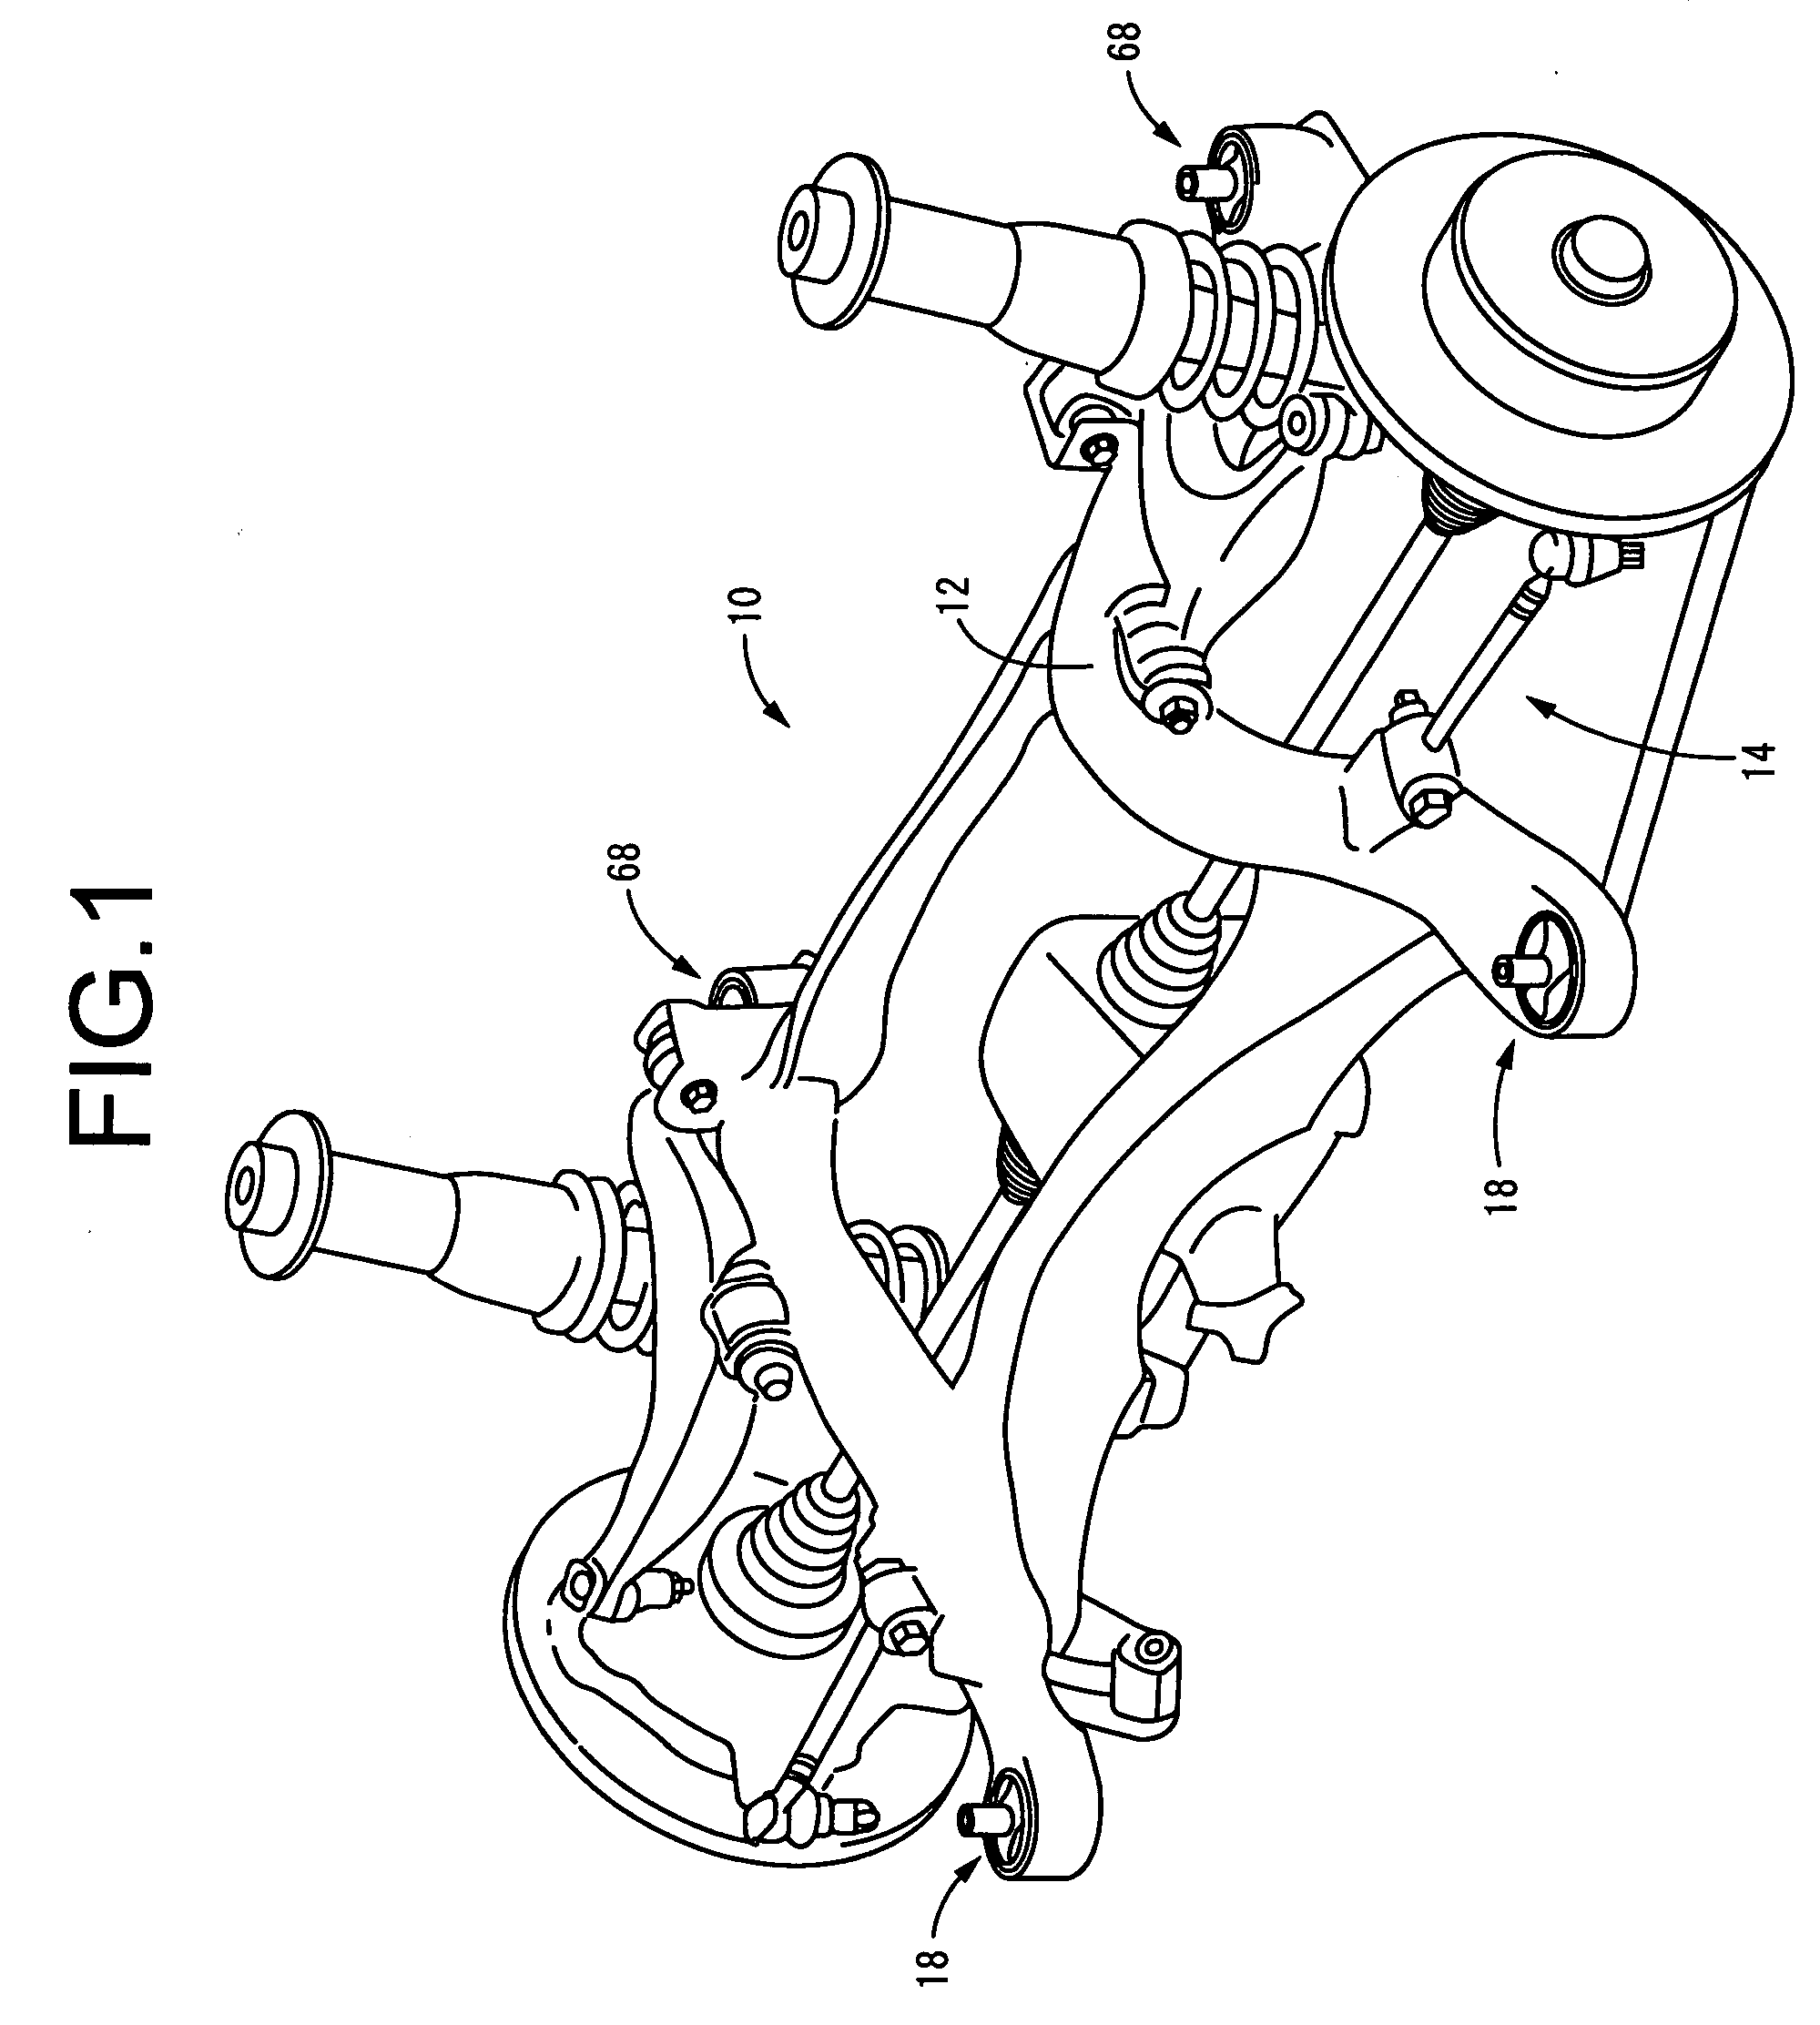 Subframe structure and vibration damper for the same